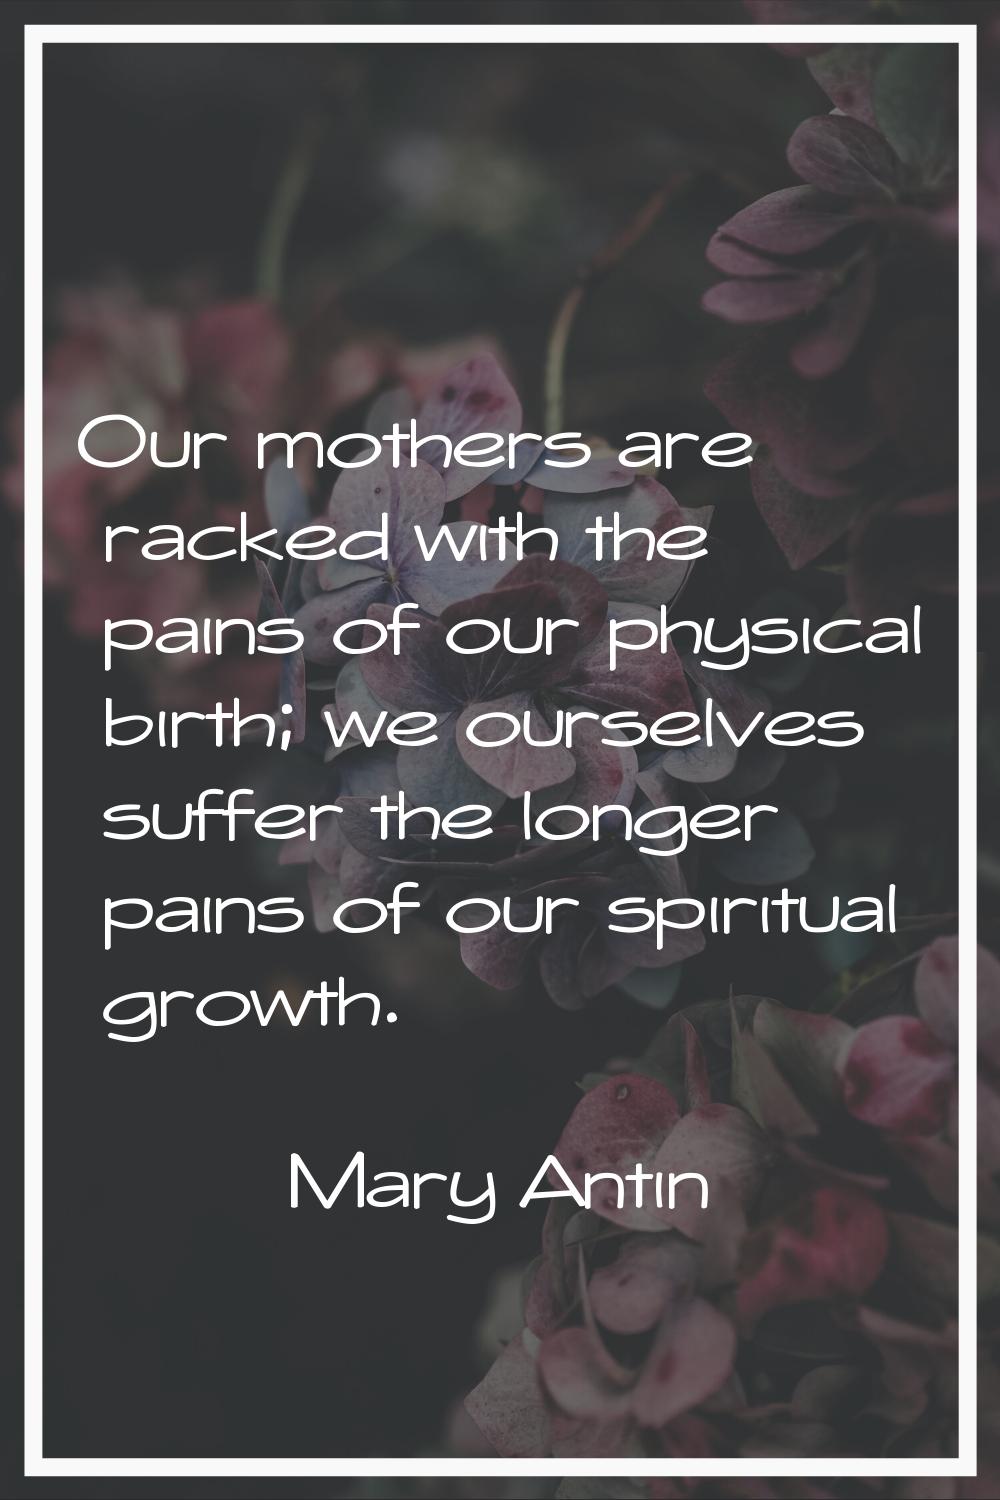 Our mothers are racked with the pains of our physical birth; we ourselves suffer the longer pains o